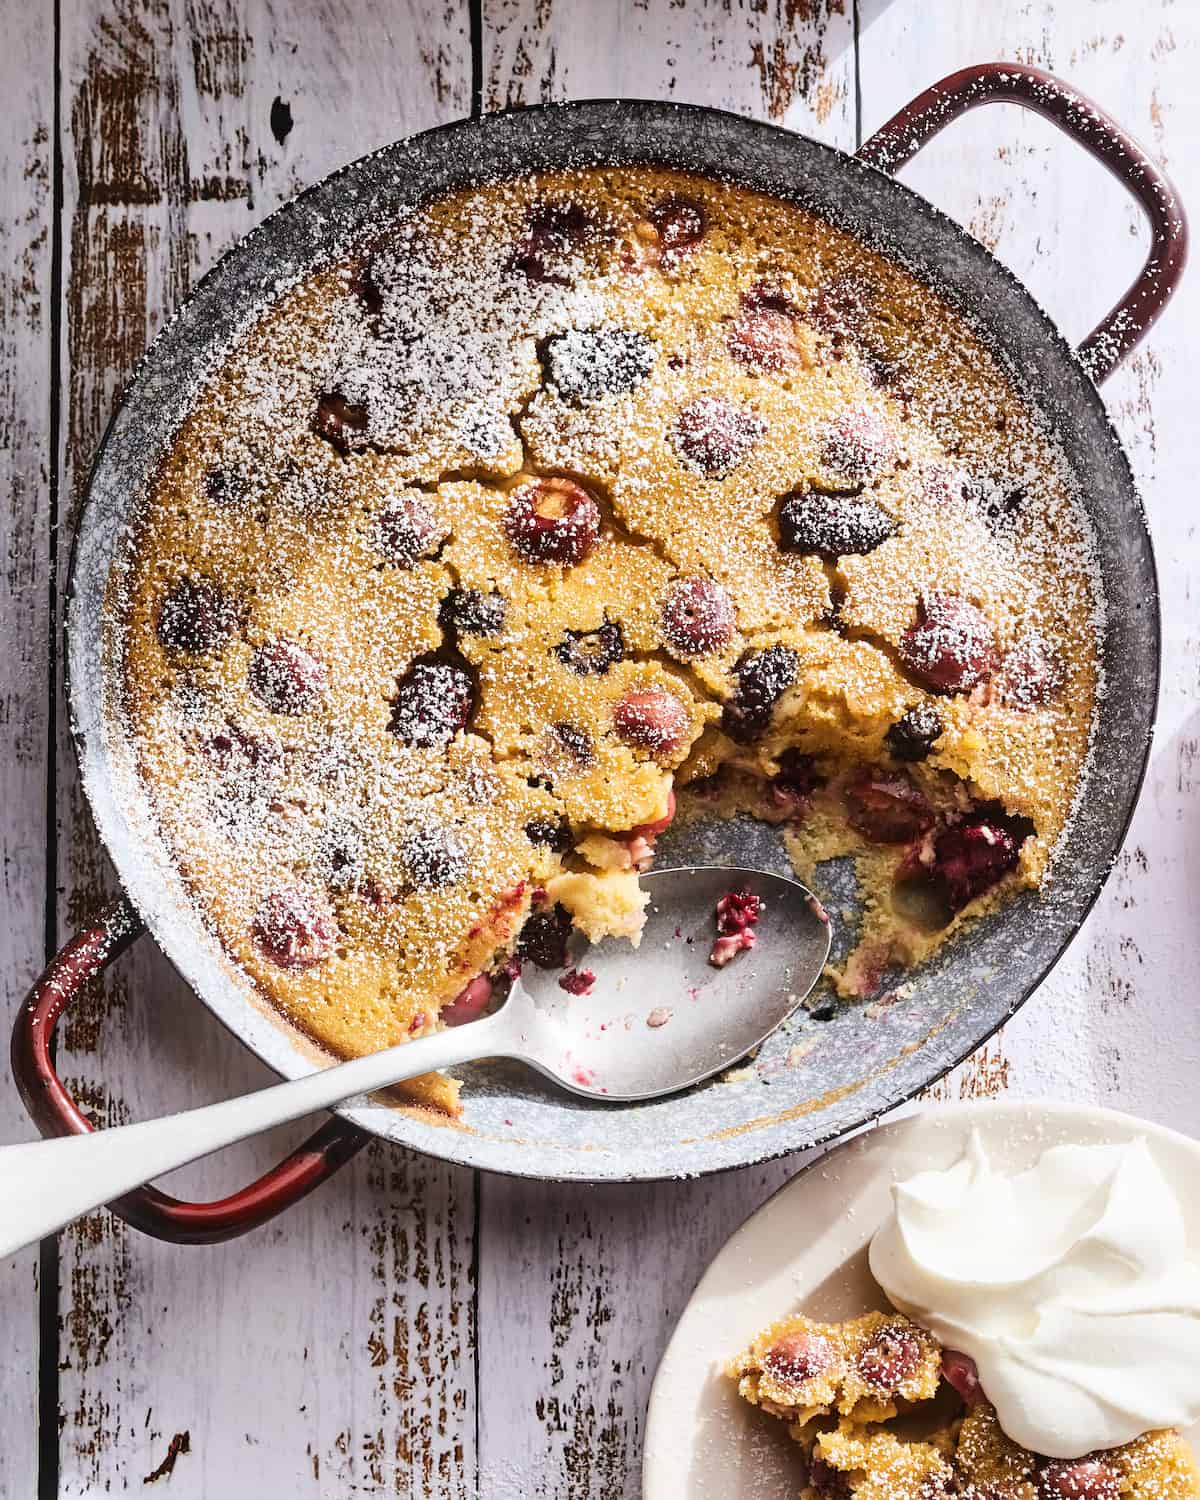 Cherry Clafoutis in a round copper metal baking dish on a white washed wood background with a dusting of powdered sugar sprinkled over top and a spoonful or two missing from the bottom right corner of the baking dish.